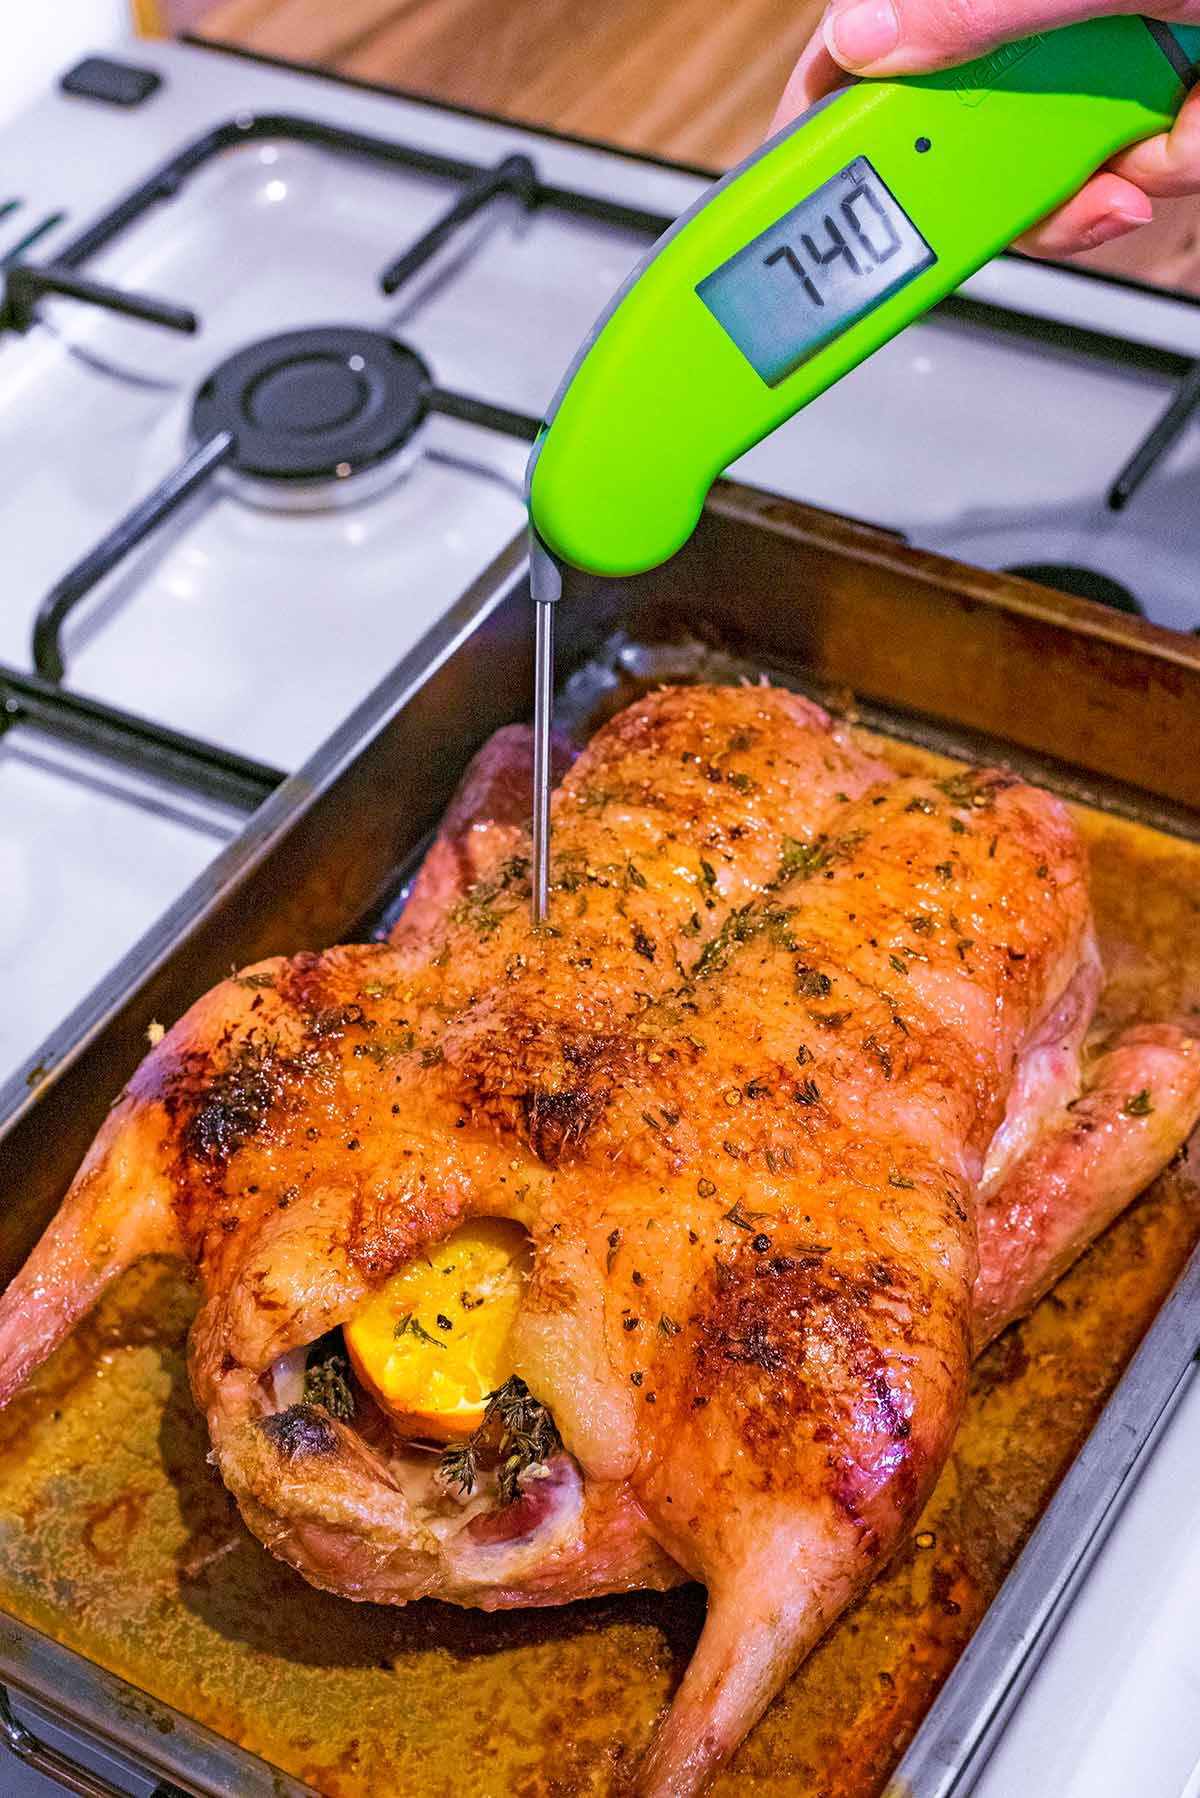 A whole cooked duck in a roasting pan with a meat thermometer showing 74 degrees.